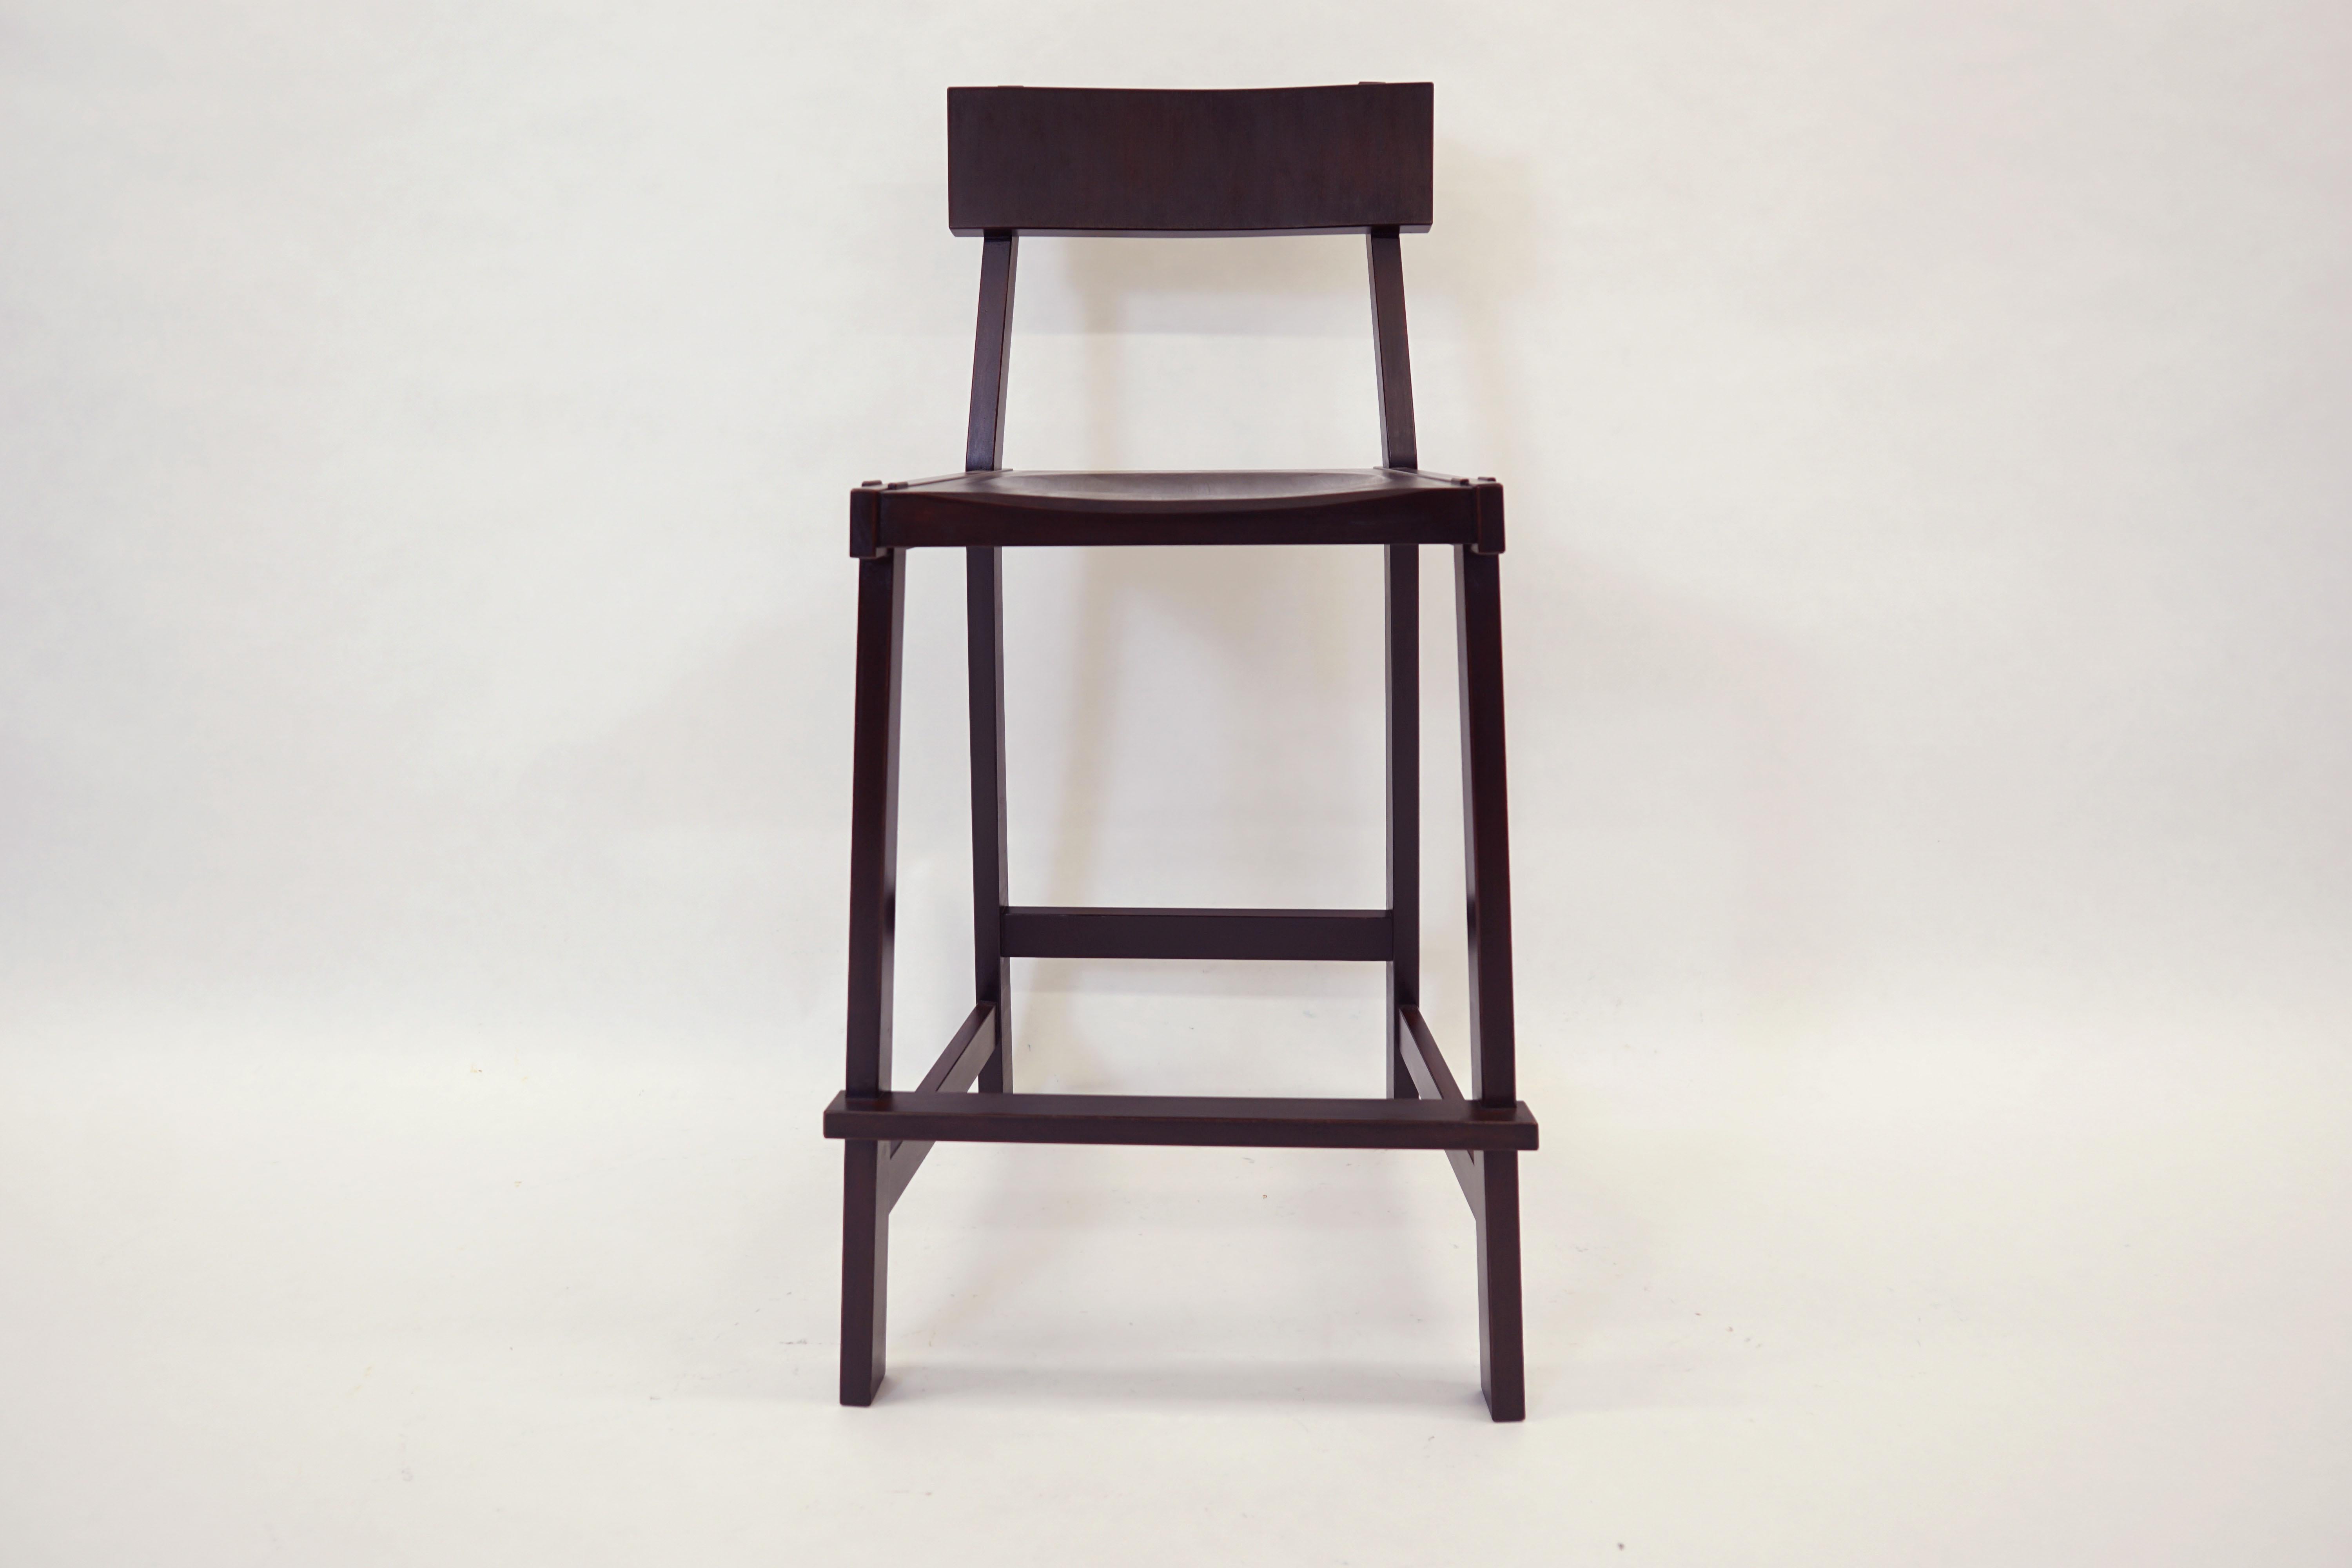 The Montrose Stool with a Back has all the cool joinery details of the original Montrose Stool but with a back. Made from solid hardwoods with a carved seat for comfort. Constructed with lots of exposed joinery and interesting details. The top of